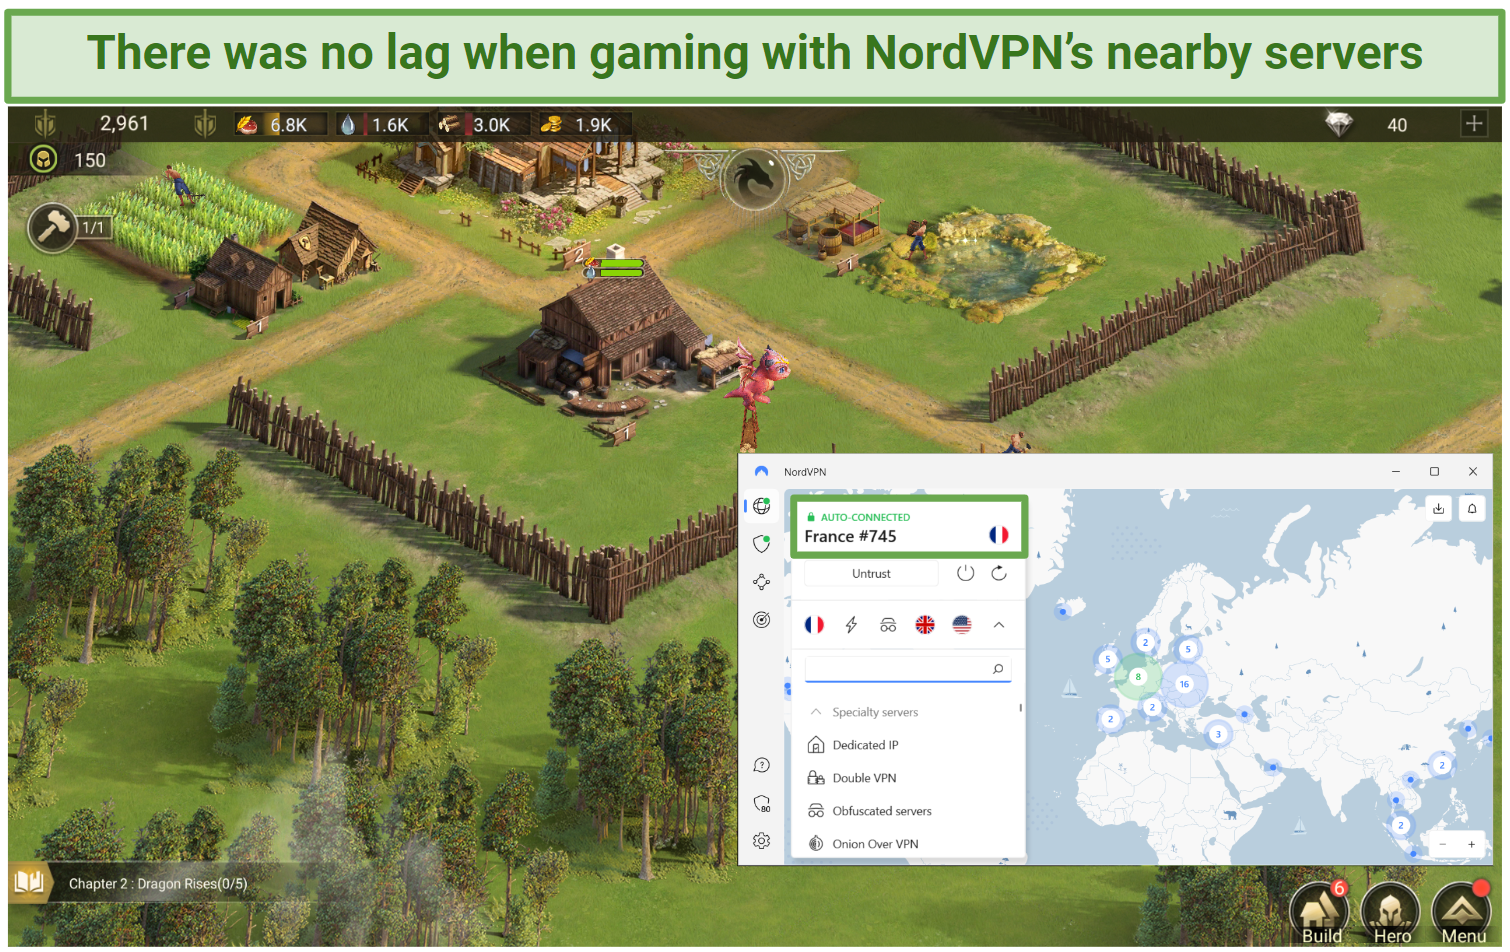 Screenshot of NordVPN's France server while gaming with zero lagging